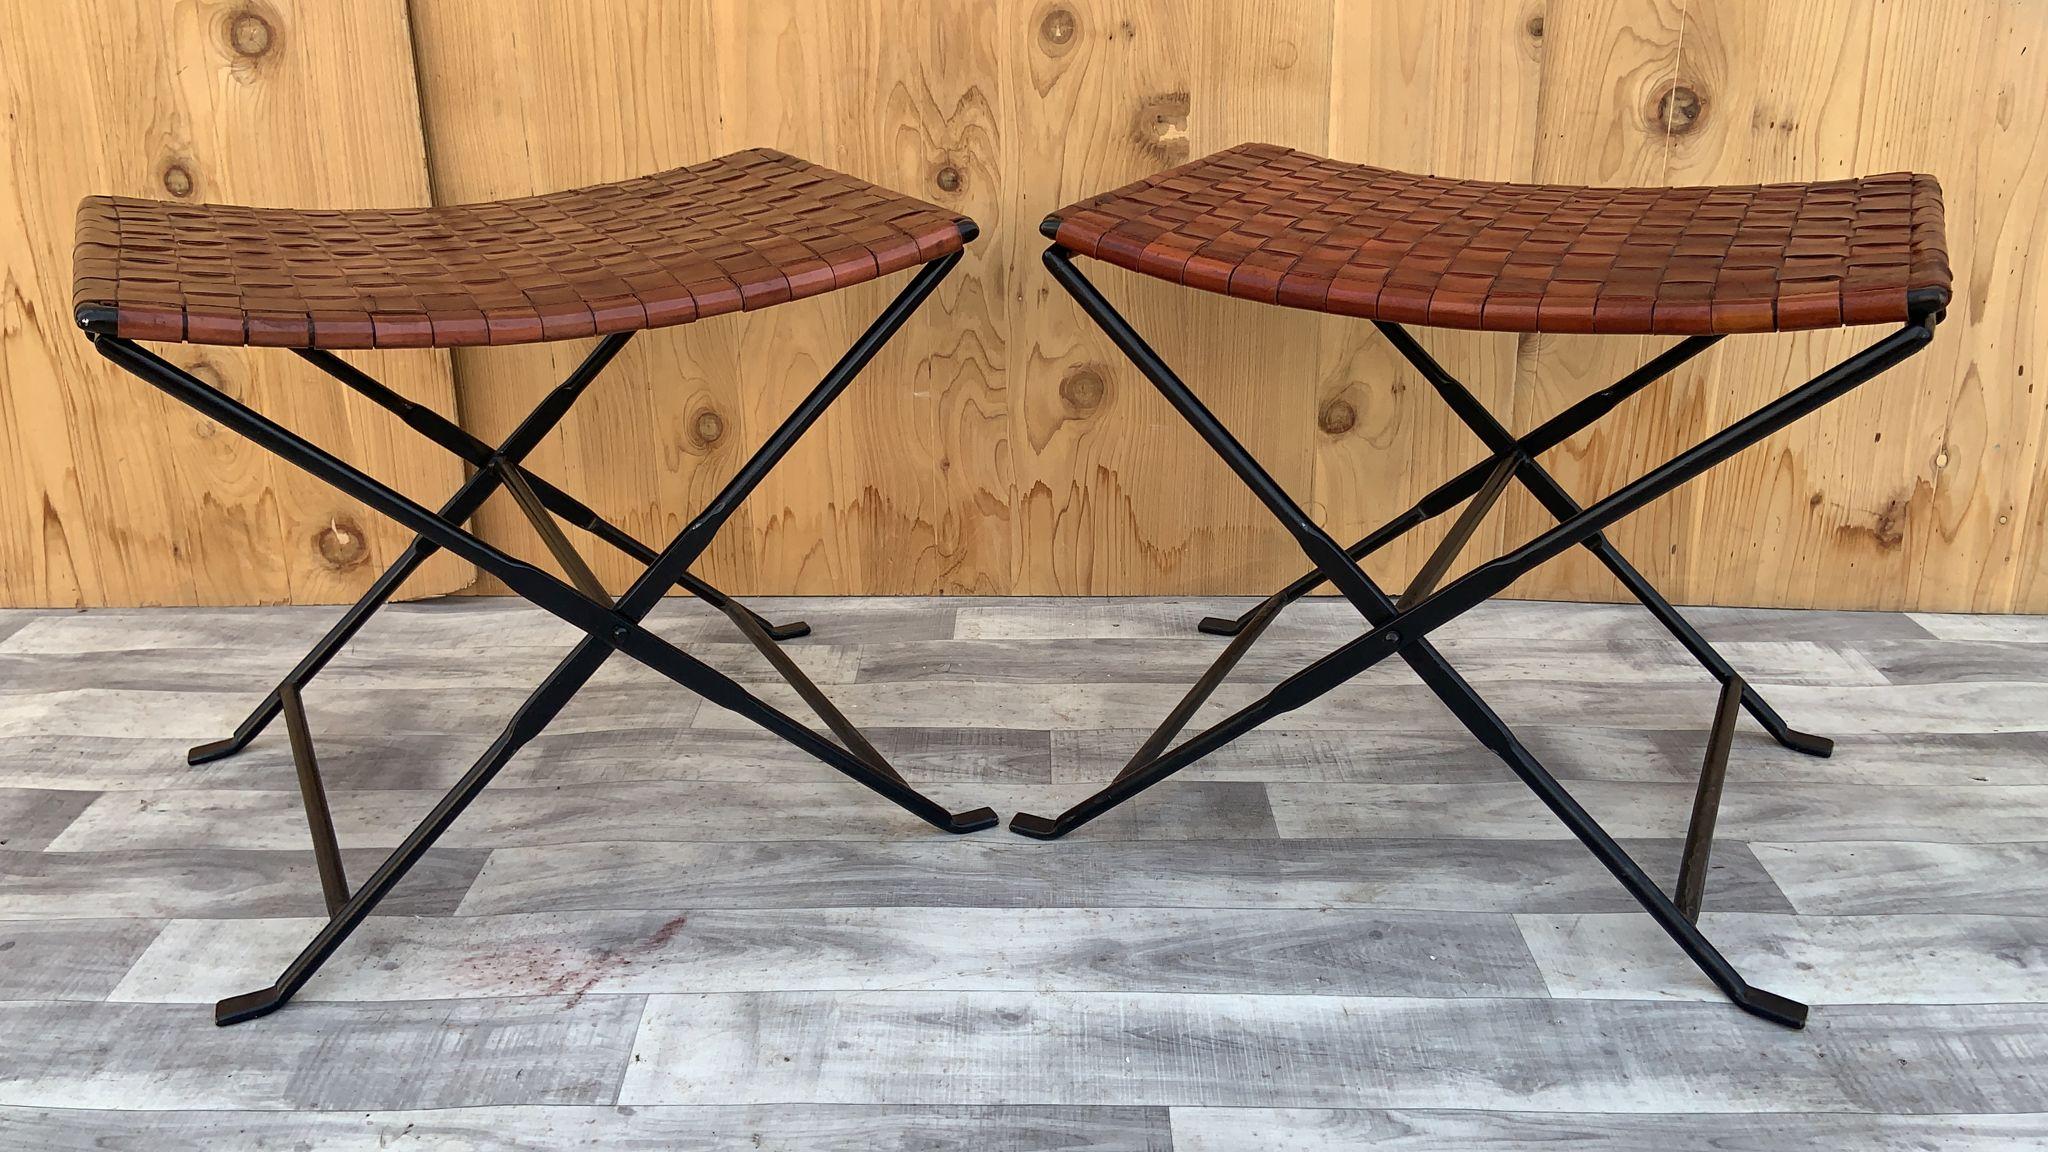 Vintage Hand Forged Wrought-Iron and Woven Leather Folding Stool - Pair 

Gorgeous vintage hand forged wrought-iron folding stools with hand woven Italian full grain leather. Solid construction and functional that would be a perfect addition to